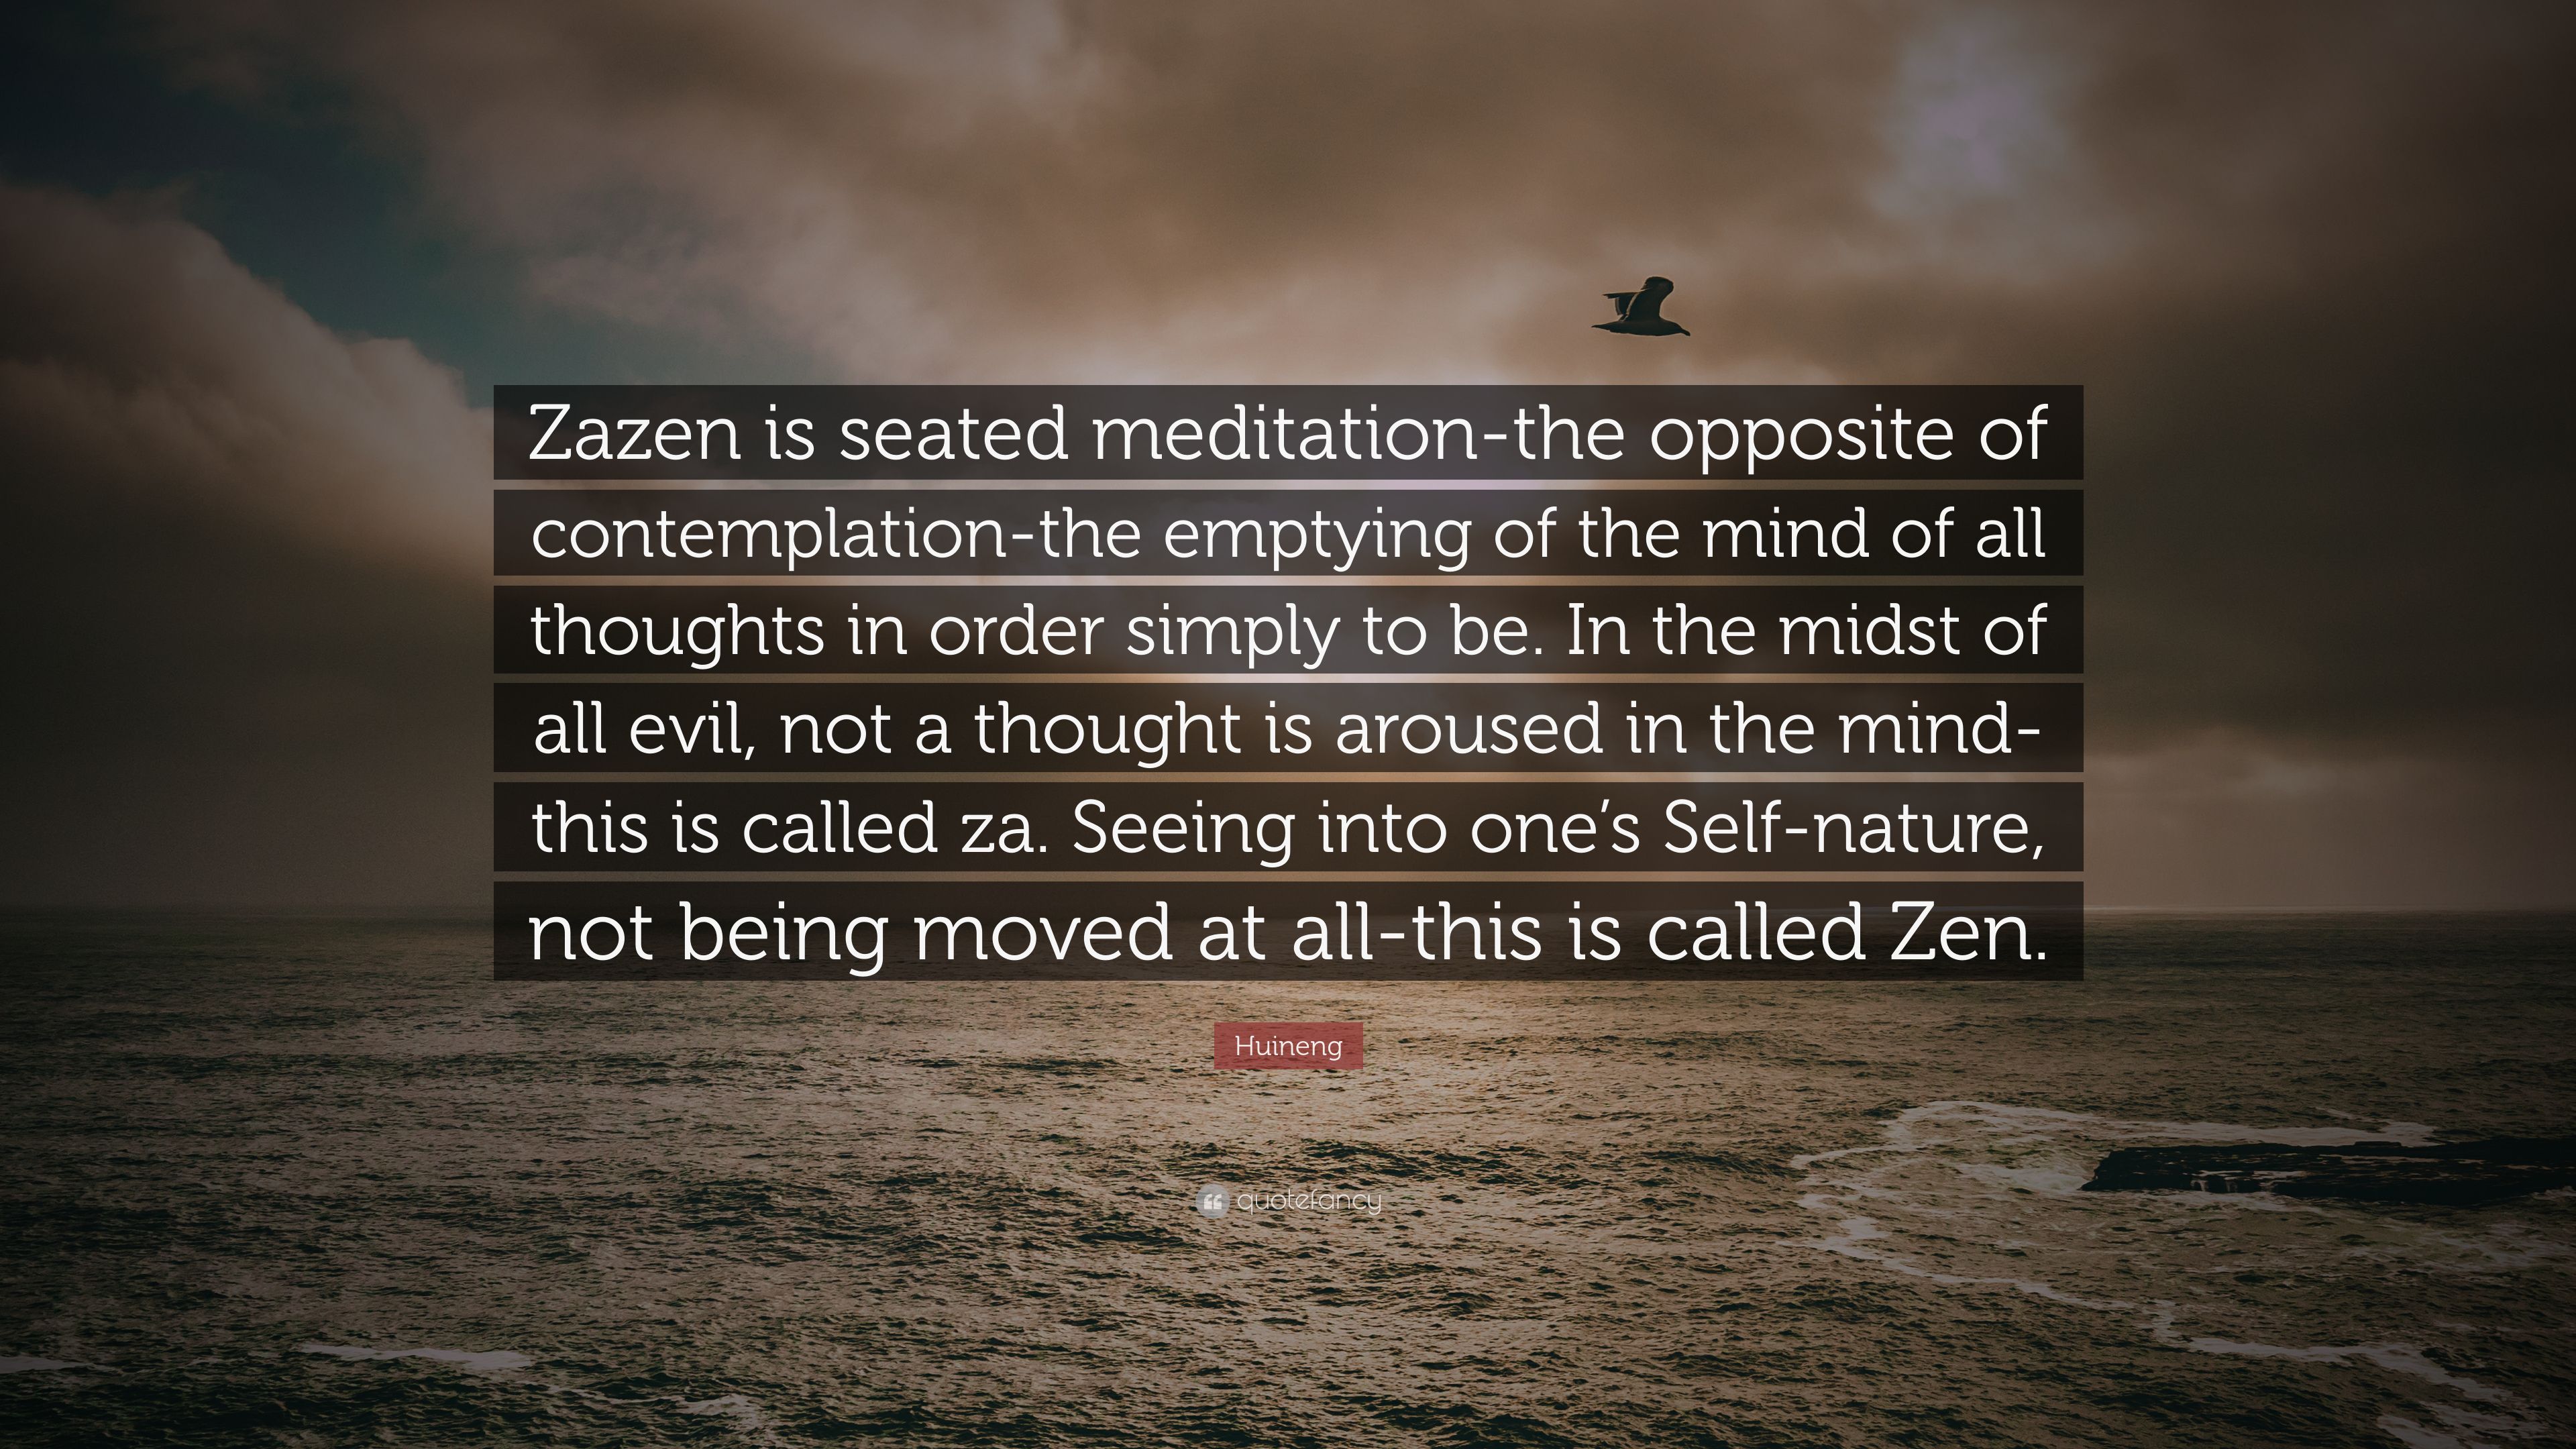 Huineng Quote: “Zazen Is Seated Meditation The Opposite Of Contemplation The Emptying Of The Mind Of All Thoughts In Order Simply To Be.” (12 Wallpaper)